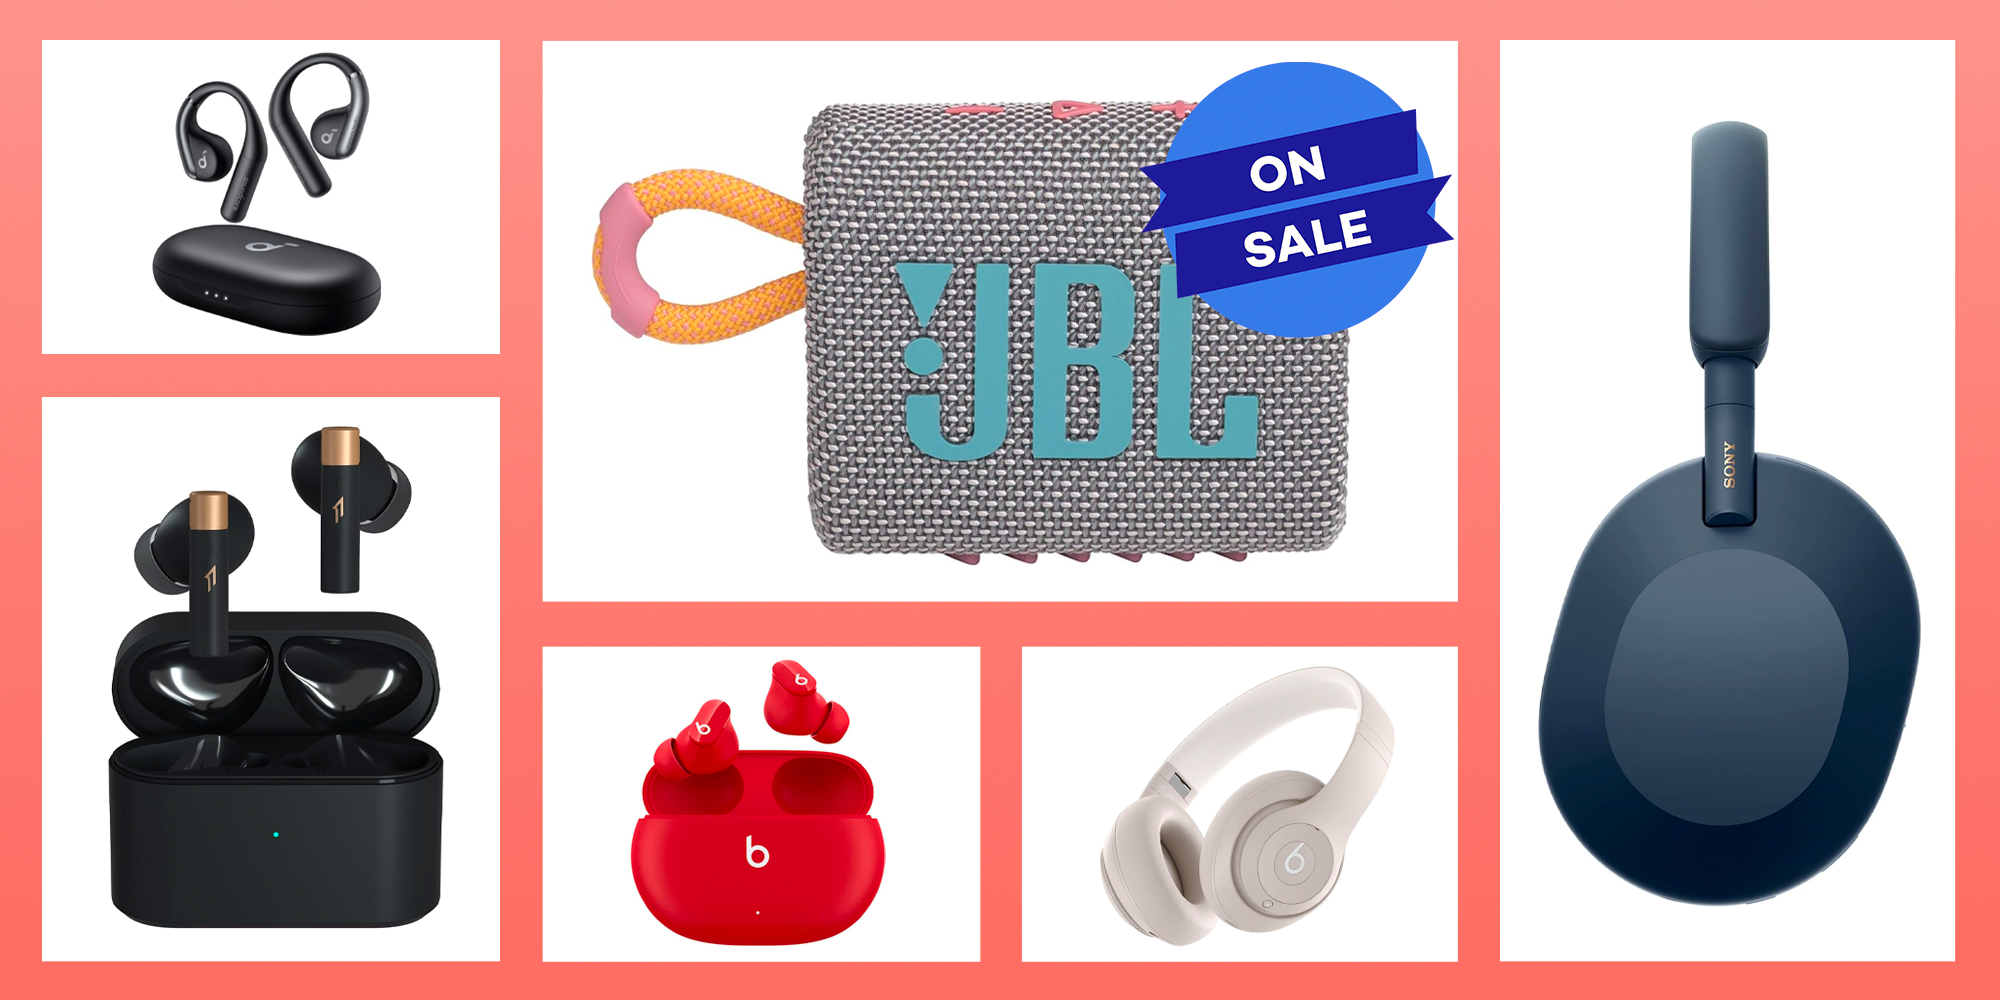 JBL Headphones Are Up to 50% Off on